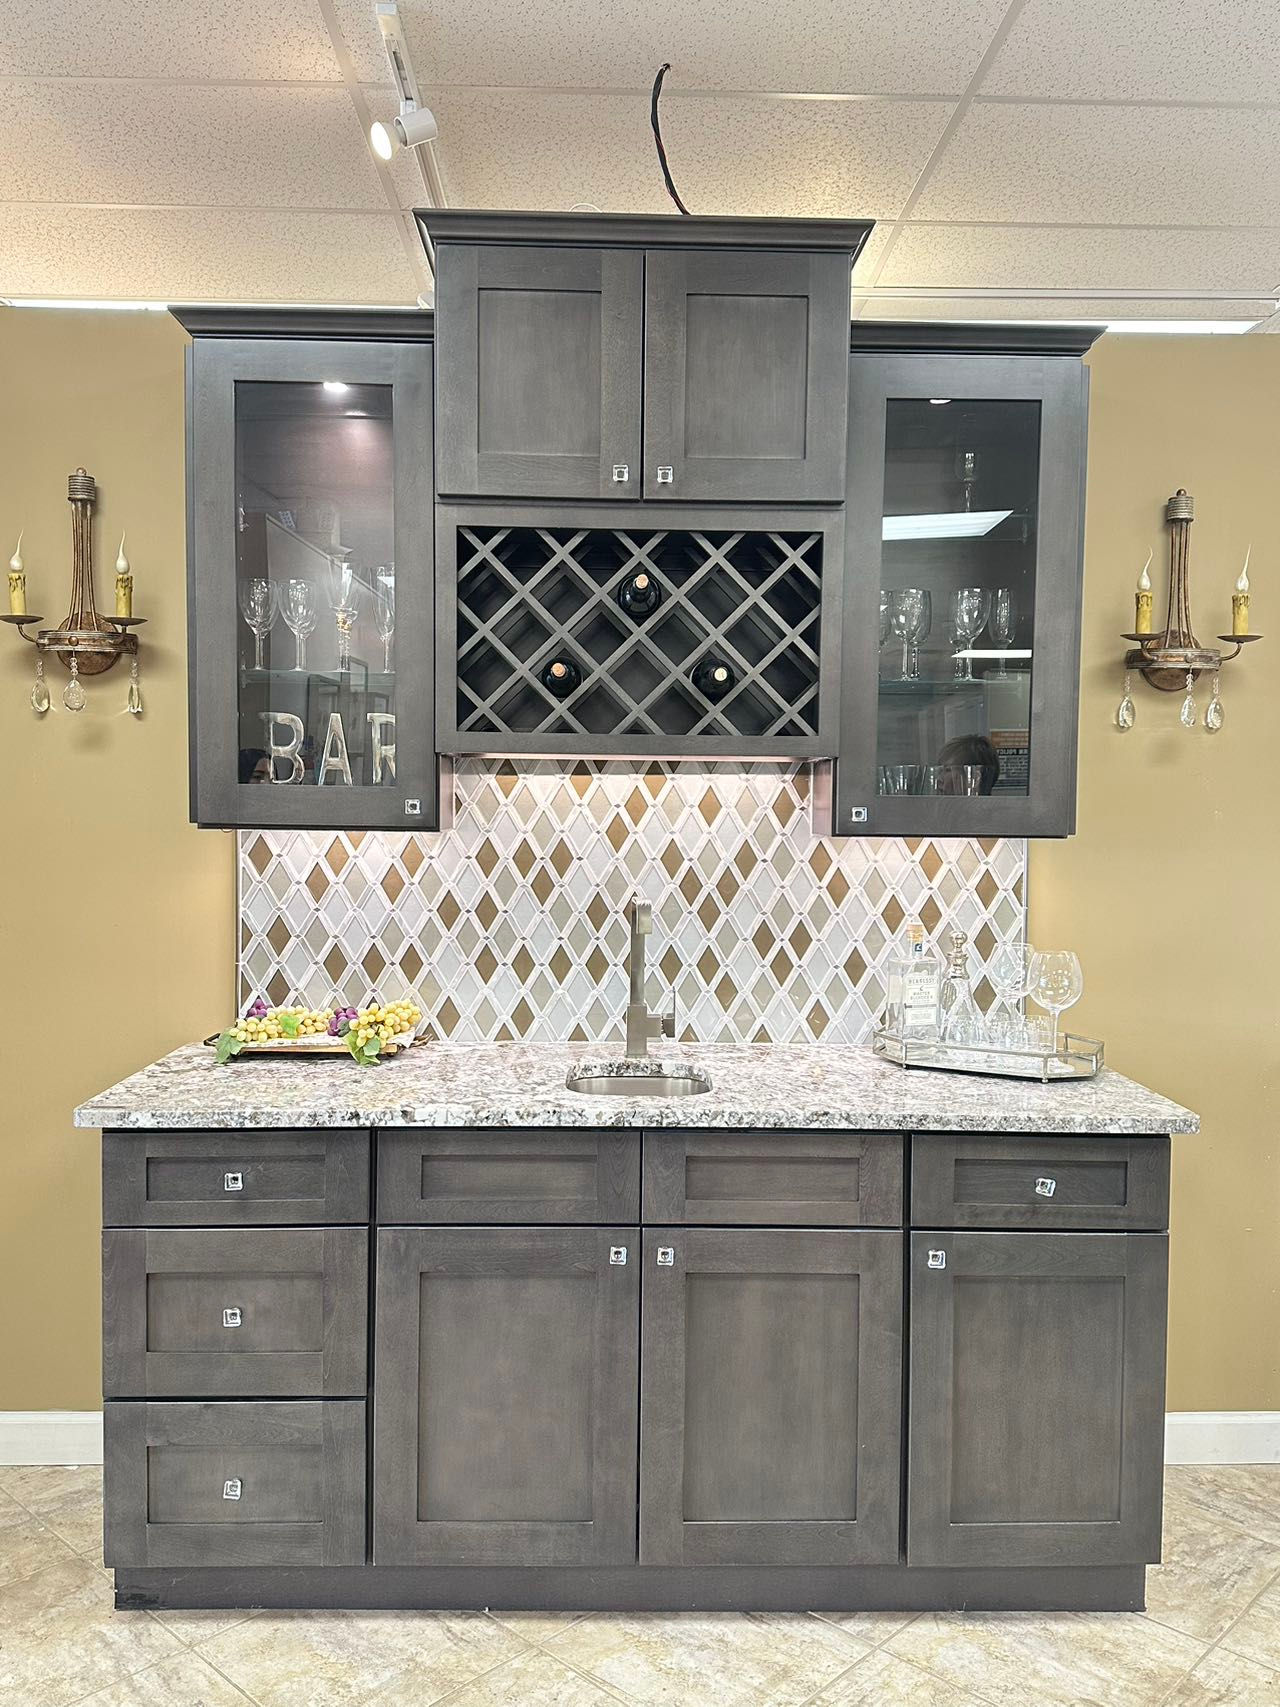 KITCHEN DISPLAY FOR SALE